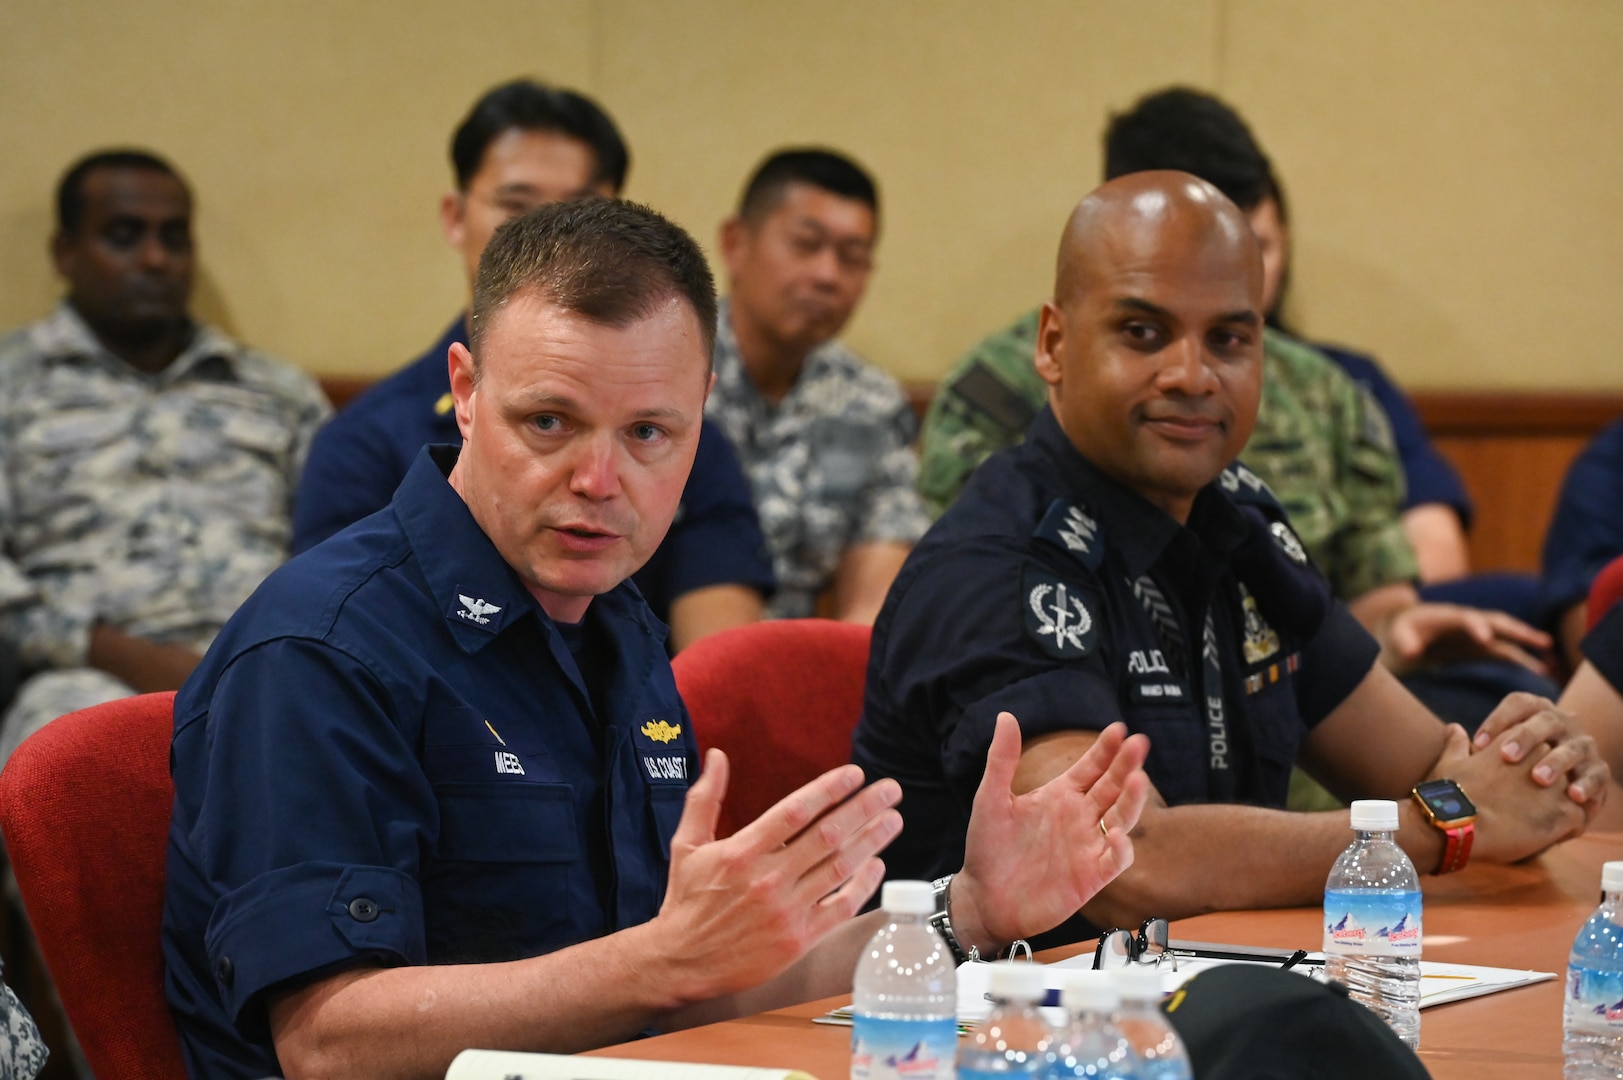 Capt. Billy Mees, commanding officer of U.S. Coast Guard Cutter Bertholf (WMSL 750), speaks during a meeting with Republic of Singapore Navy and the Singapore Police Coast Guard at the Changi Naval Base, Feb. 26, 2024. The meeting focused on how the United States and Singapore can foster collaborative partnerships through professional and at-sea engagements. (U.S. Coast Guard photo by Petty Officer Steve Strohmaier)